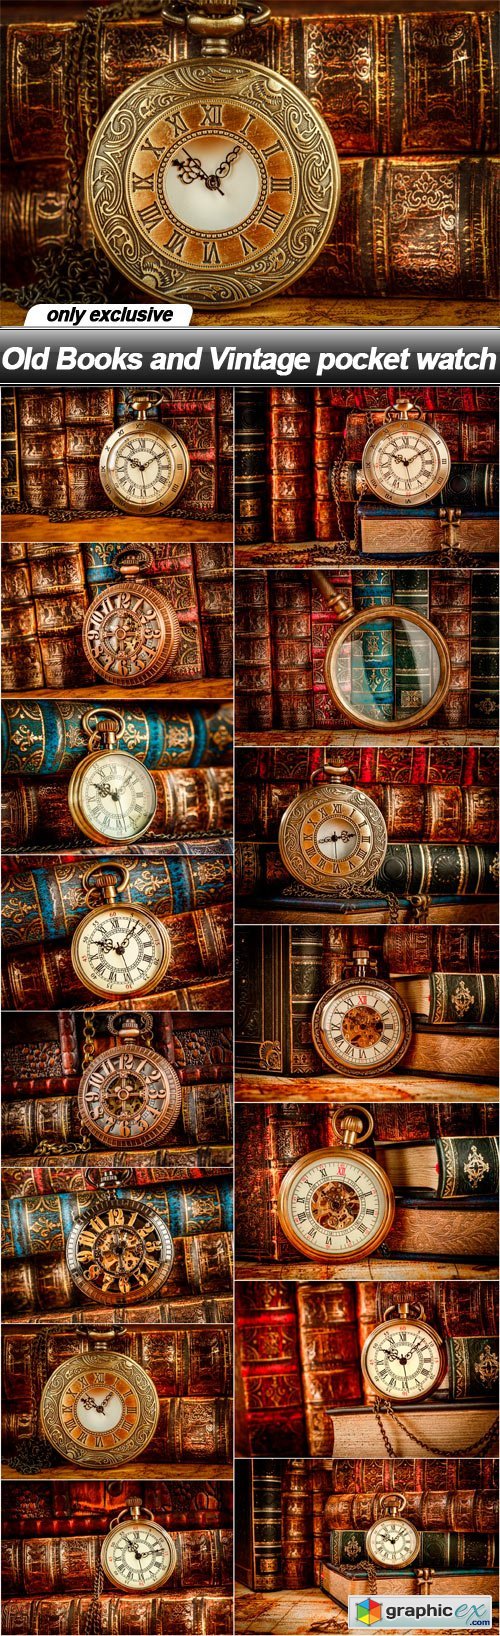 Old Books and Vintage pocket watch - 15 UHQ JPEG